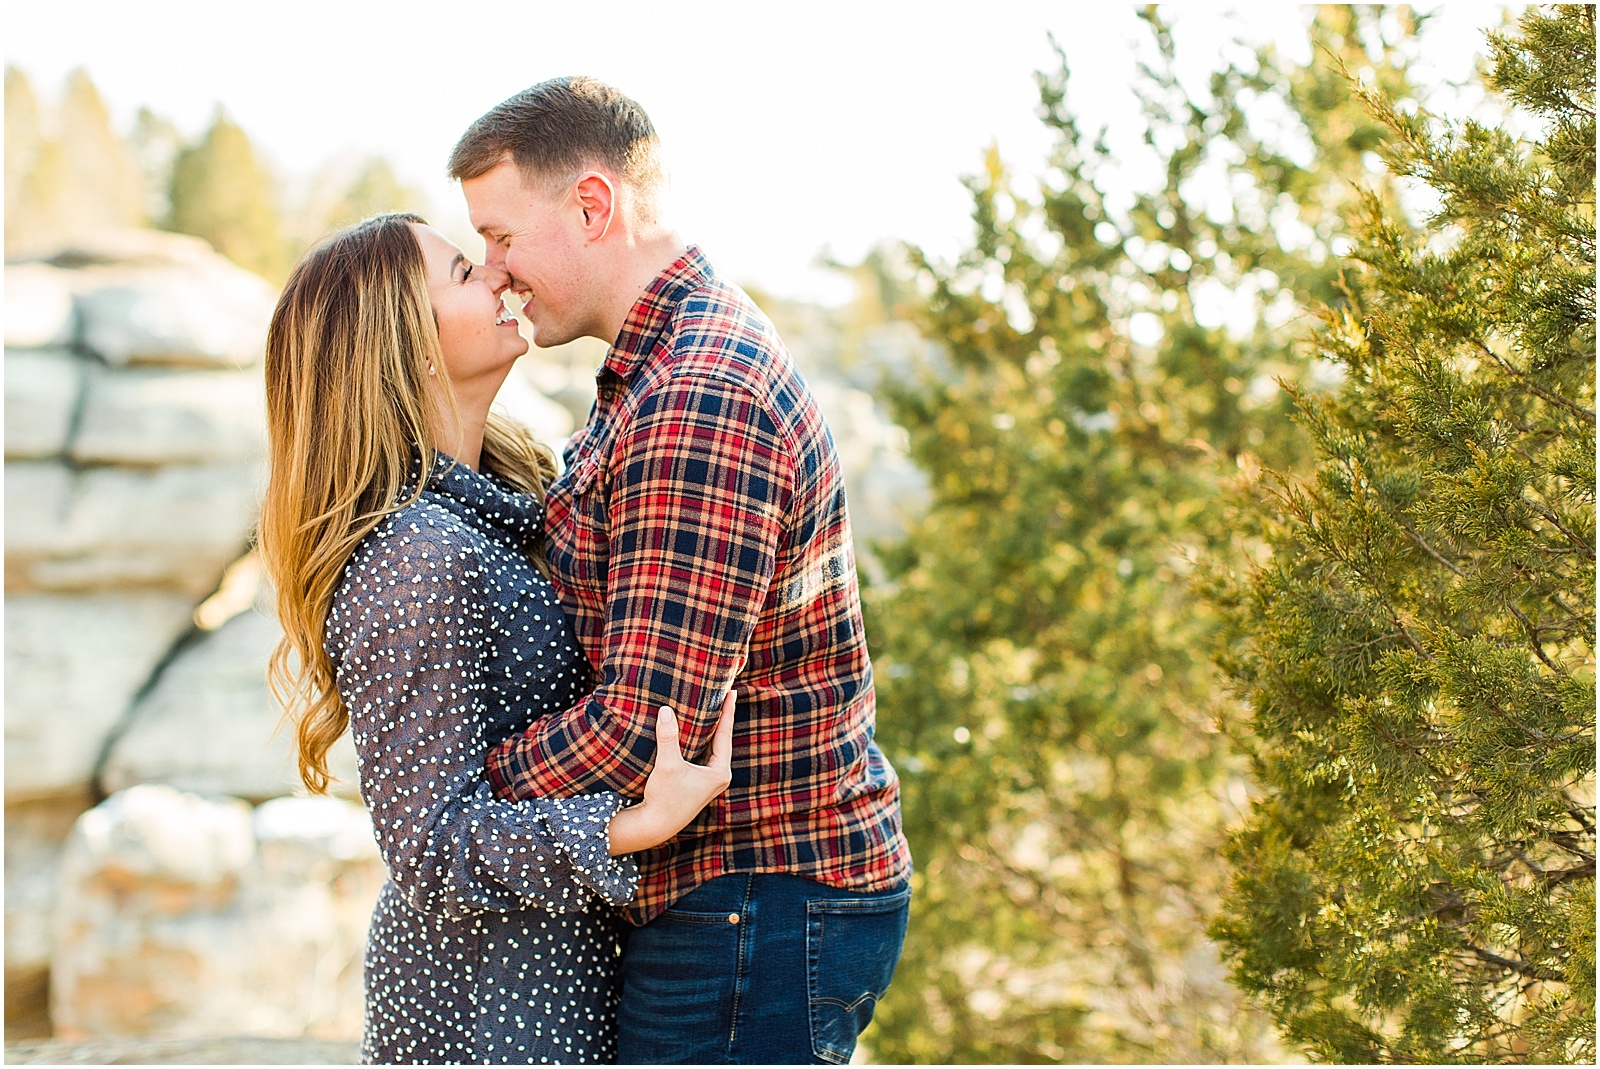 A Sunny Garden of the Gods Engagement Session | Shiloh and Lee | Bret and Brandie Photography013.jpg